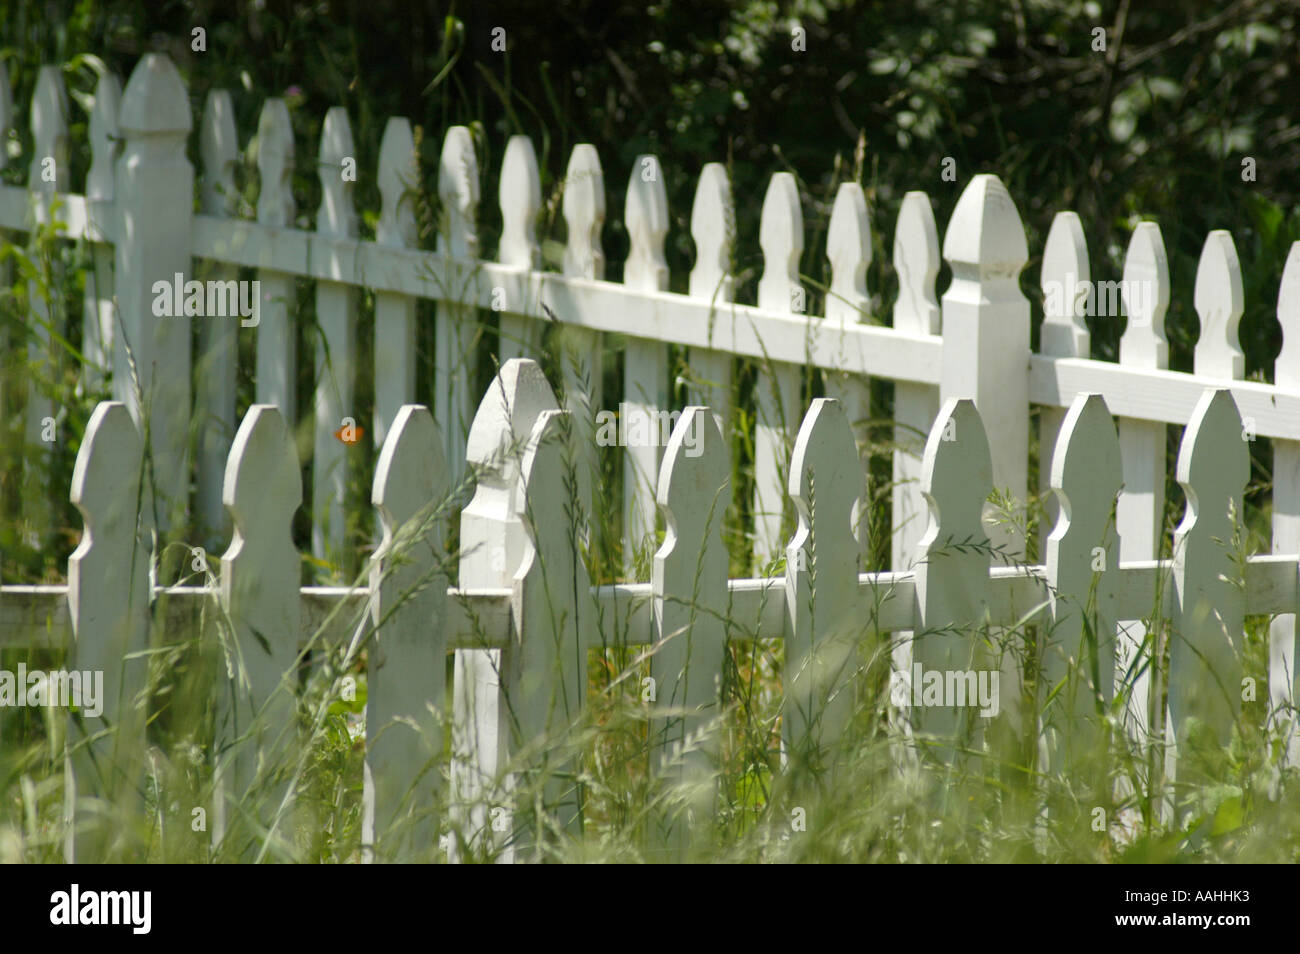 An angled shot of a country side white picket fence in grassy overgrown yard Stock Photo